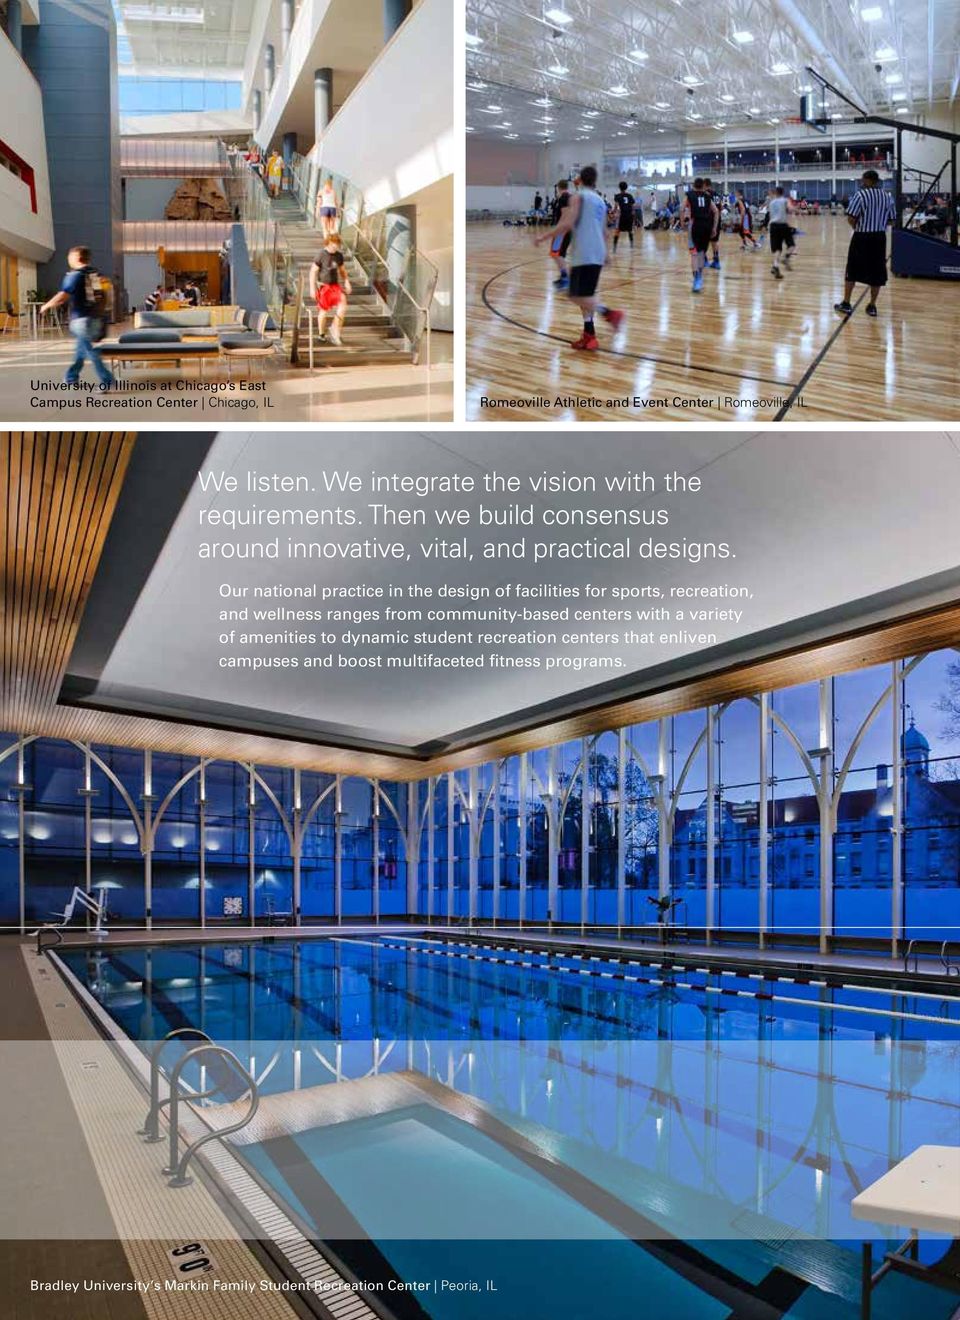 Our national practice in the design of facilities for sports, recreation, and wellness ranges from community-based centers with a variety of